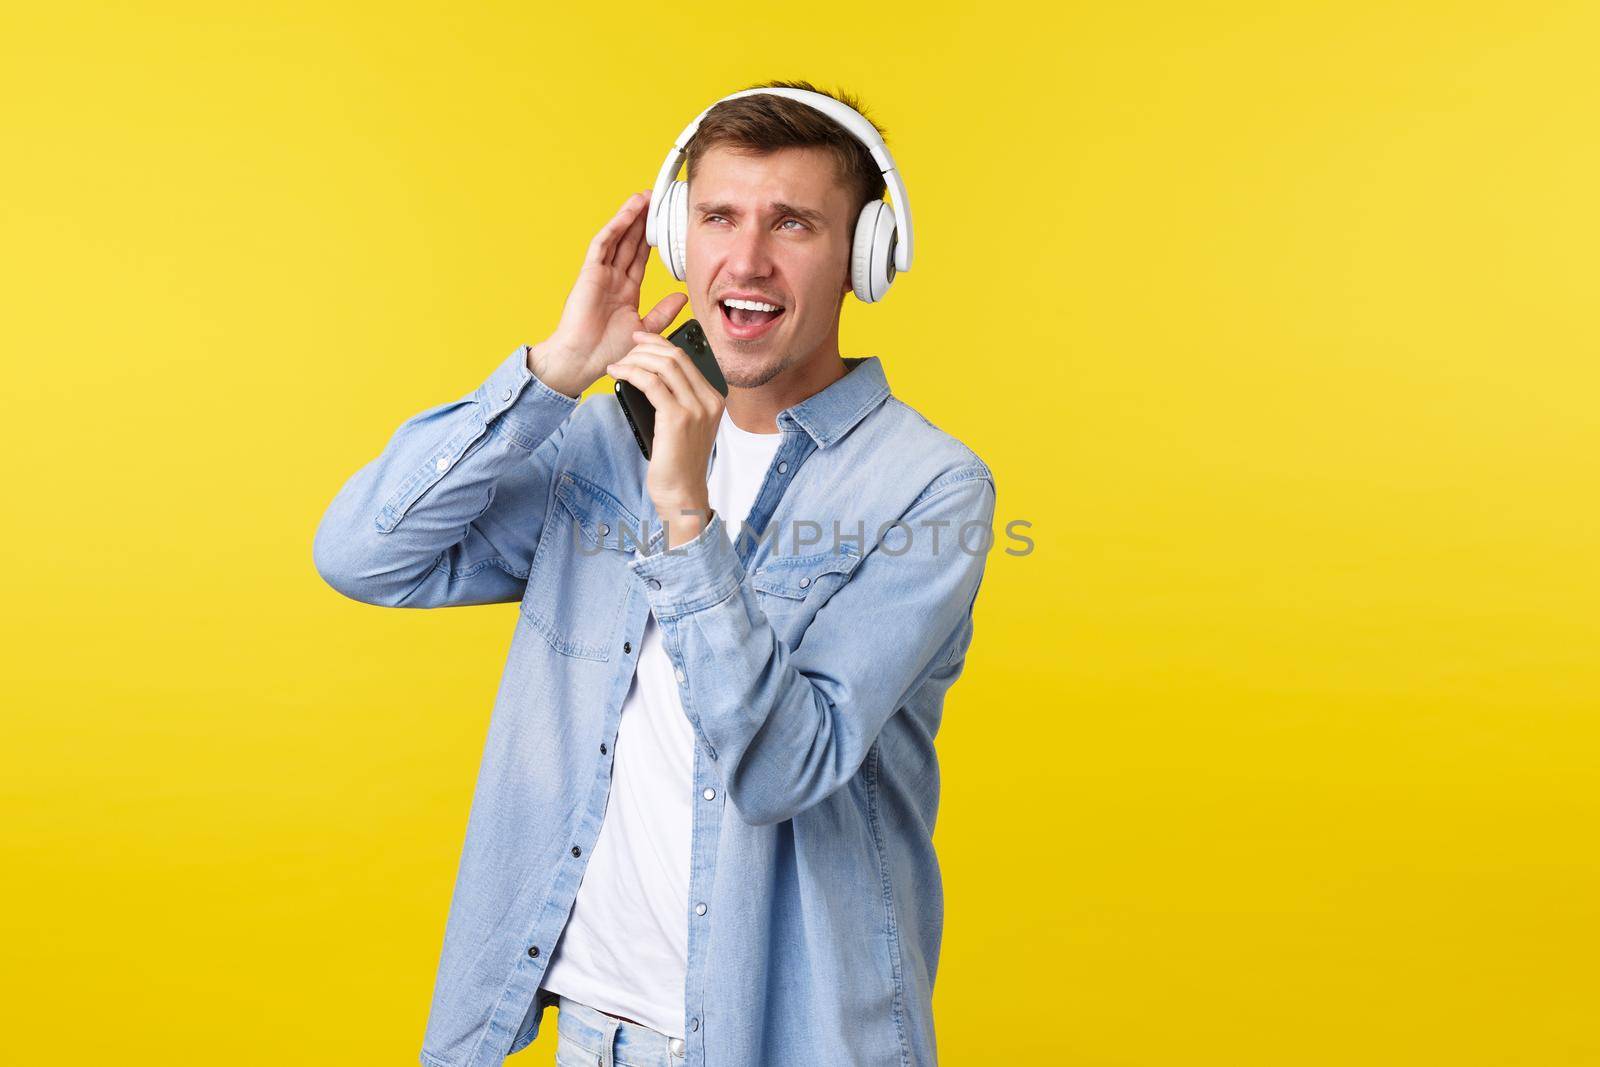 Lifestyle, summer holidays, technology concept. Happy good-looking blond guy in casual outfit, playing karaoke app, singing song into mobile phone and wearing headphones, yellow background.